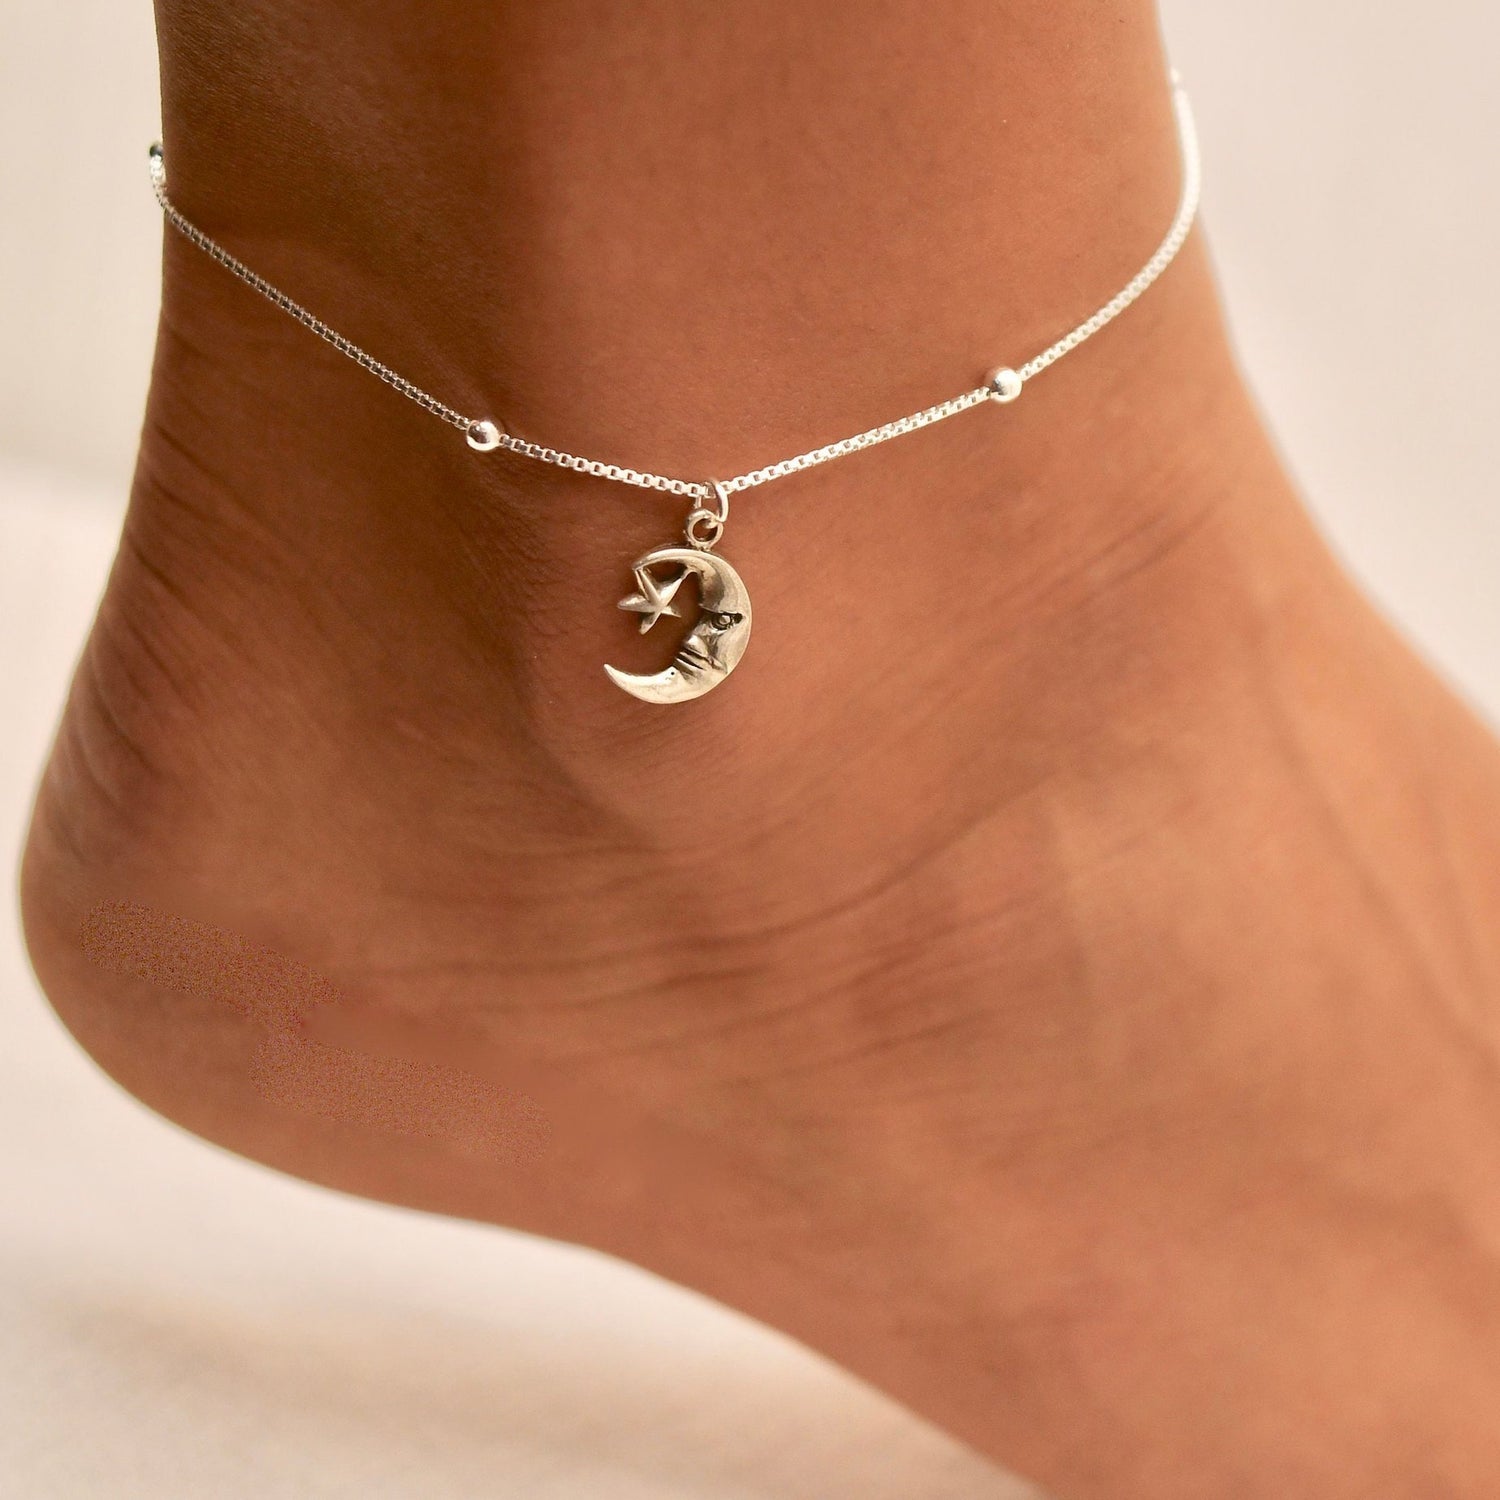 Anklets with Charms